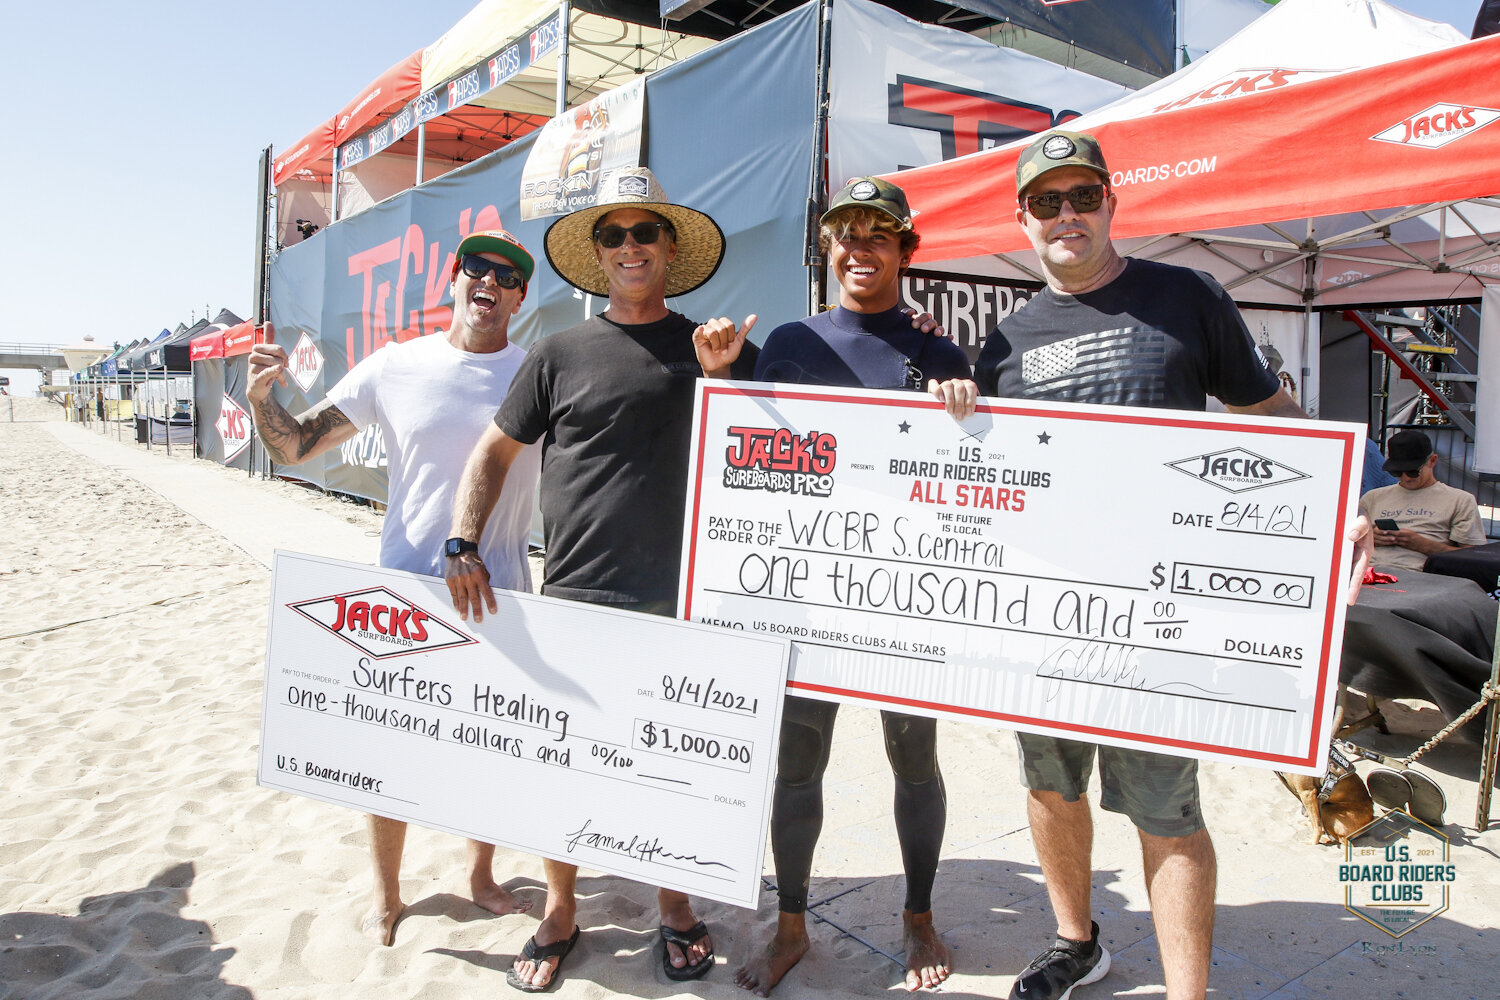 South Central donating their winnings to Surfer’s Healing with matching $1,000 from Jack’s Surfboards